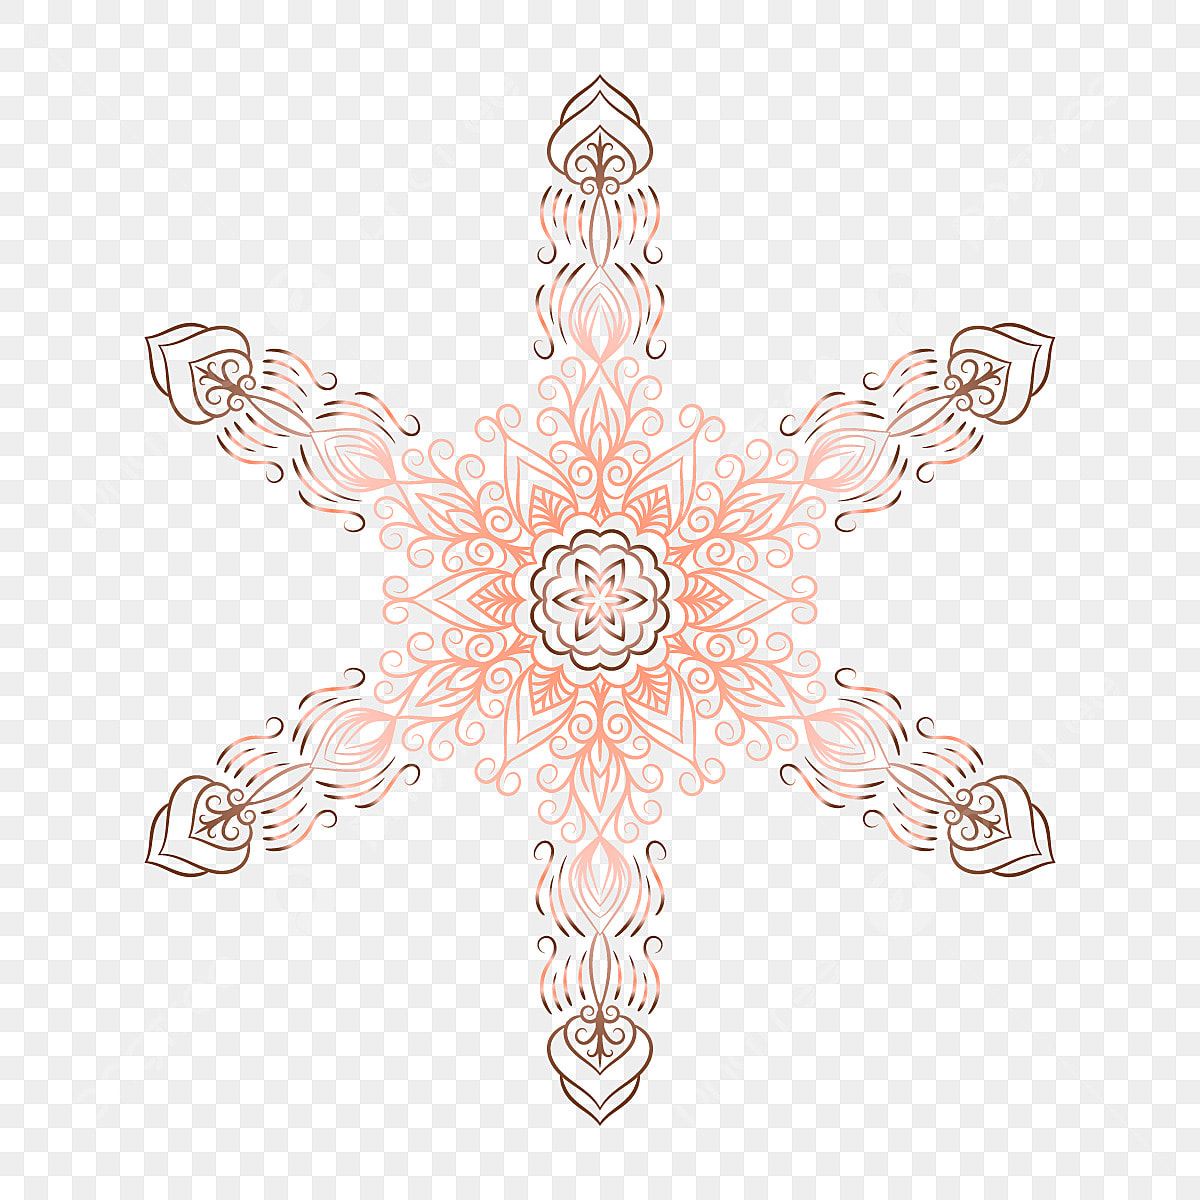 Pink Snowflake Vector HD Image, Christmas Light Pink Snowflake, Bright, Shiny, Wallpaper PNG Image For Free Download